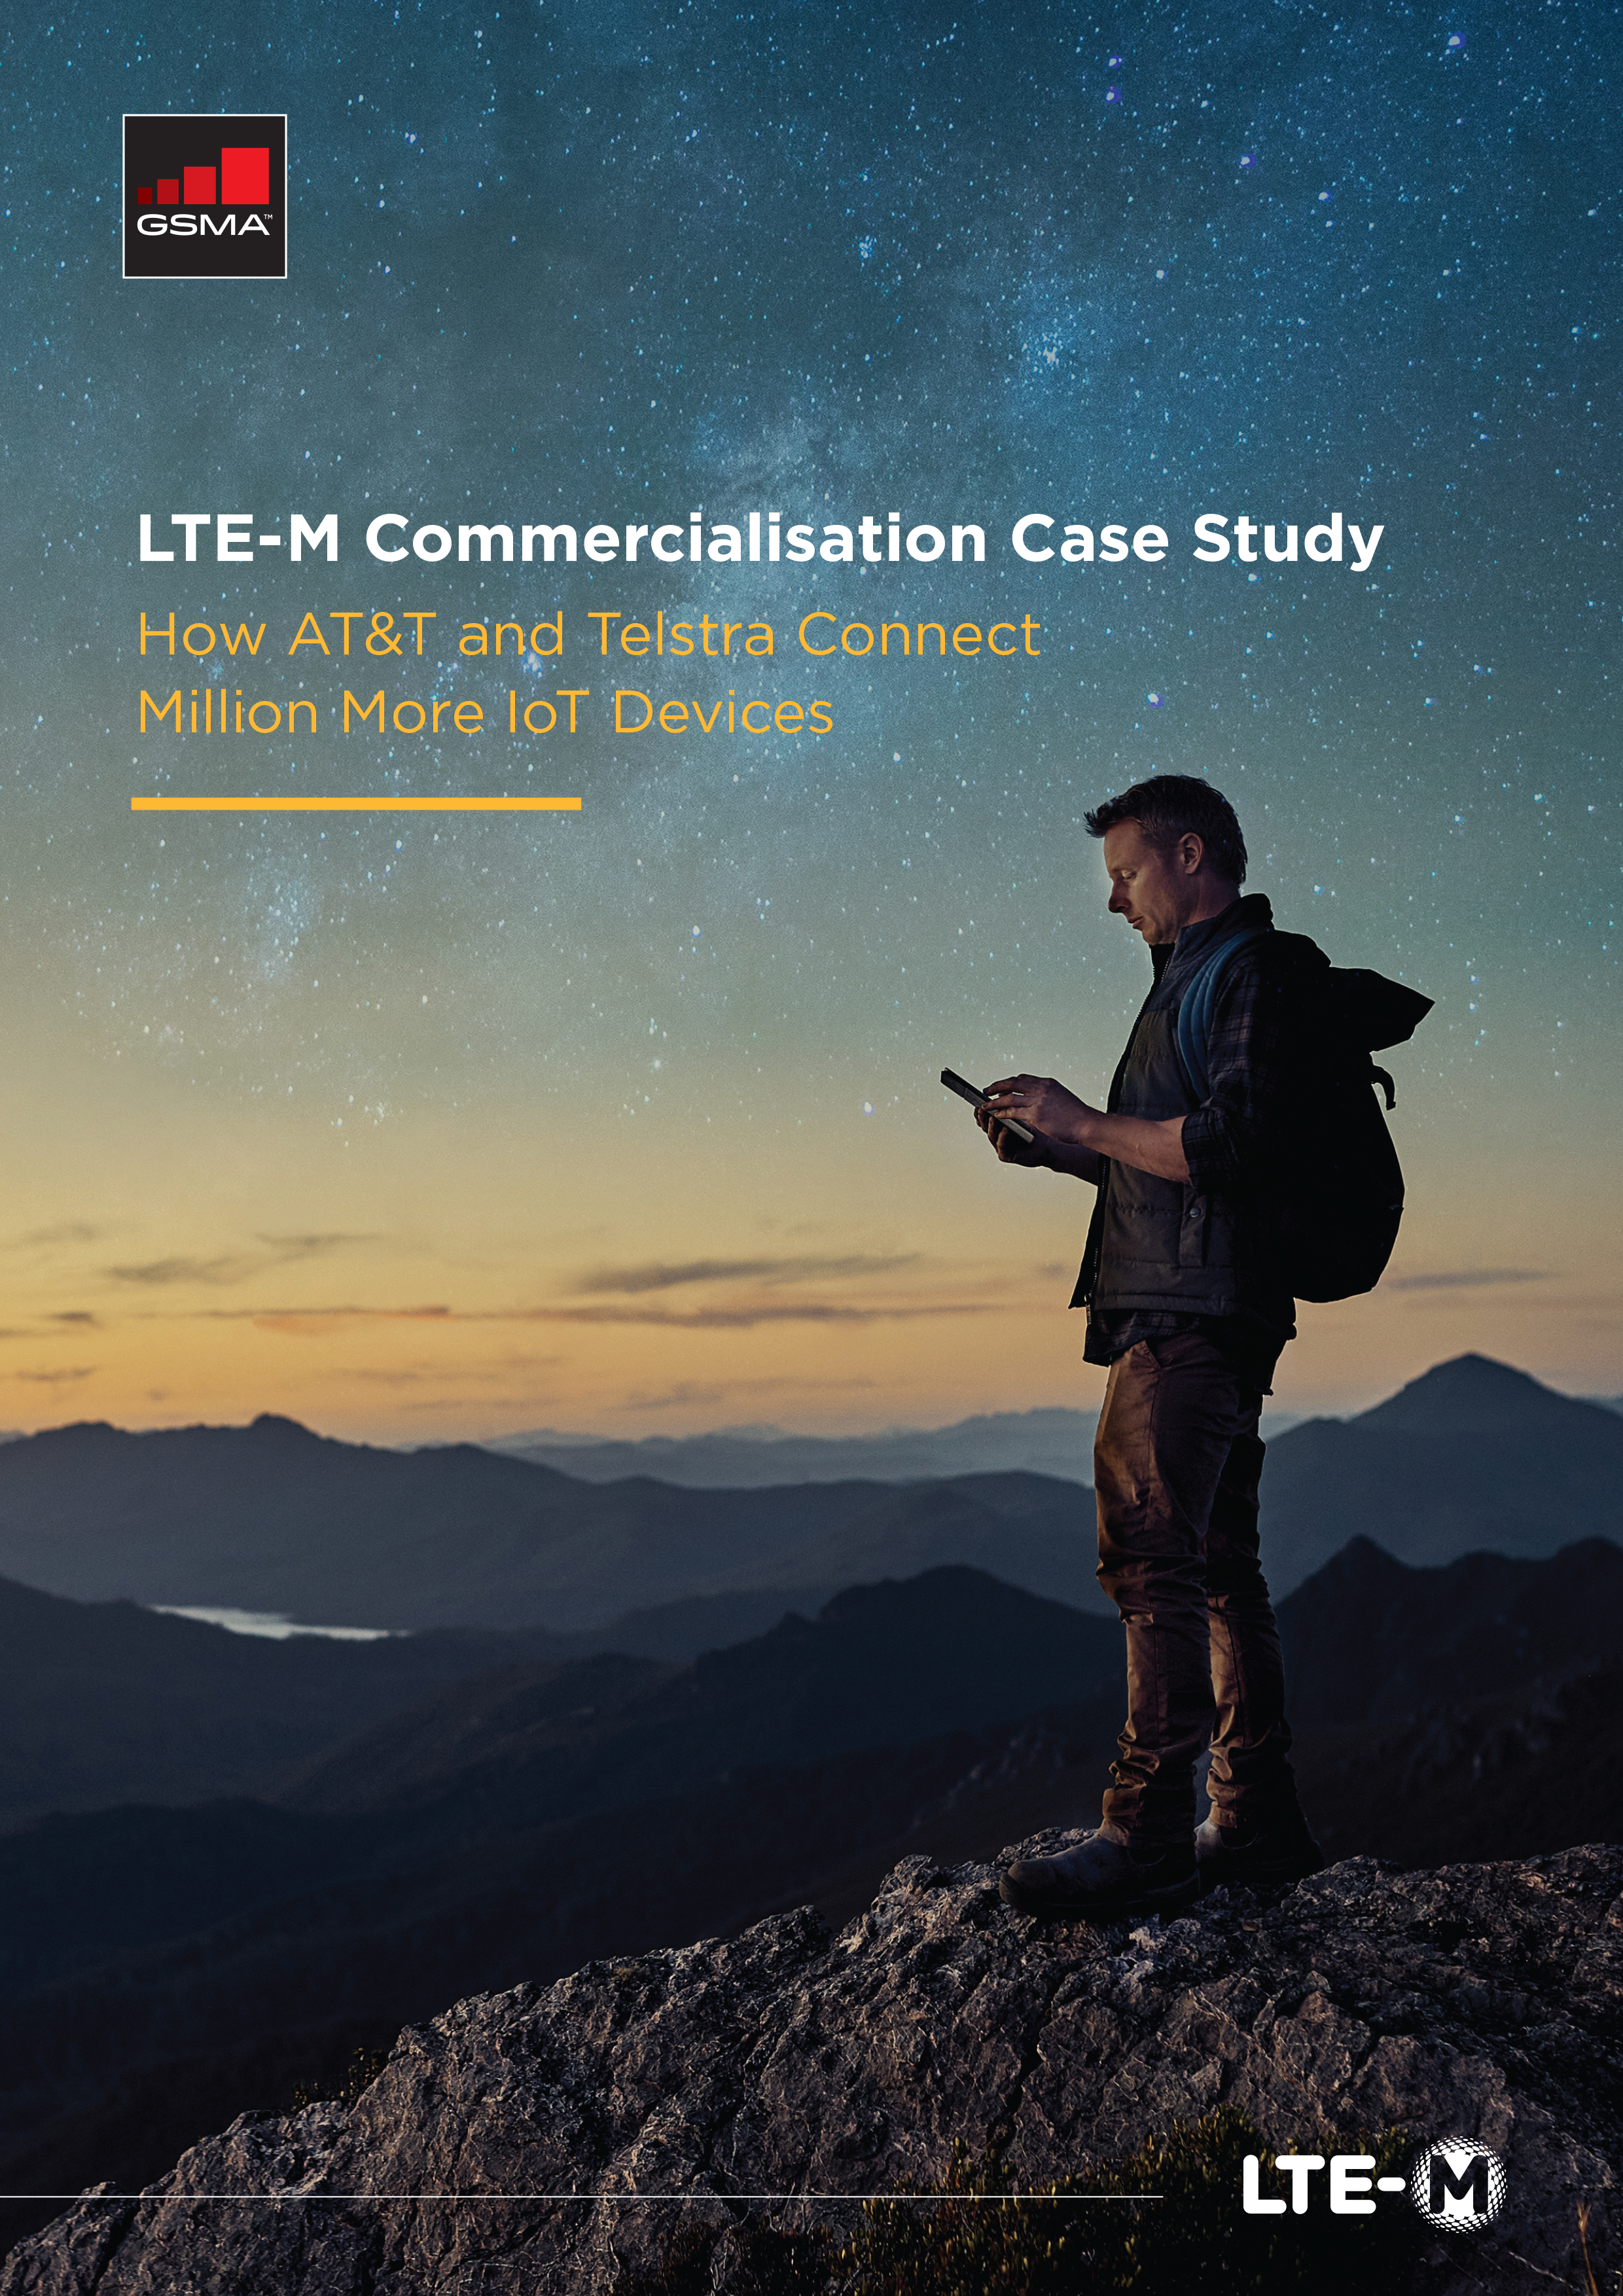 LTE-M Commercialisation Case Study: How AT&T and Telstra Connect Million More IoT Devices